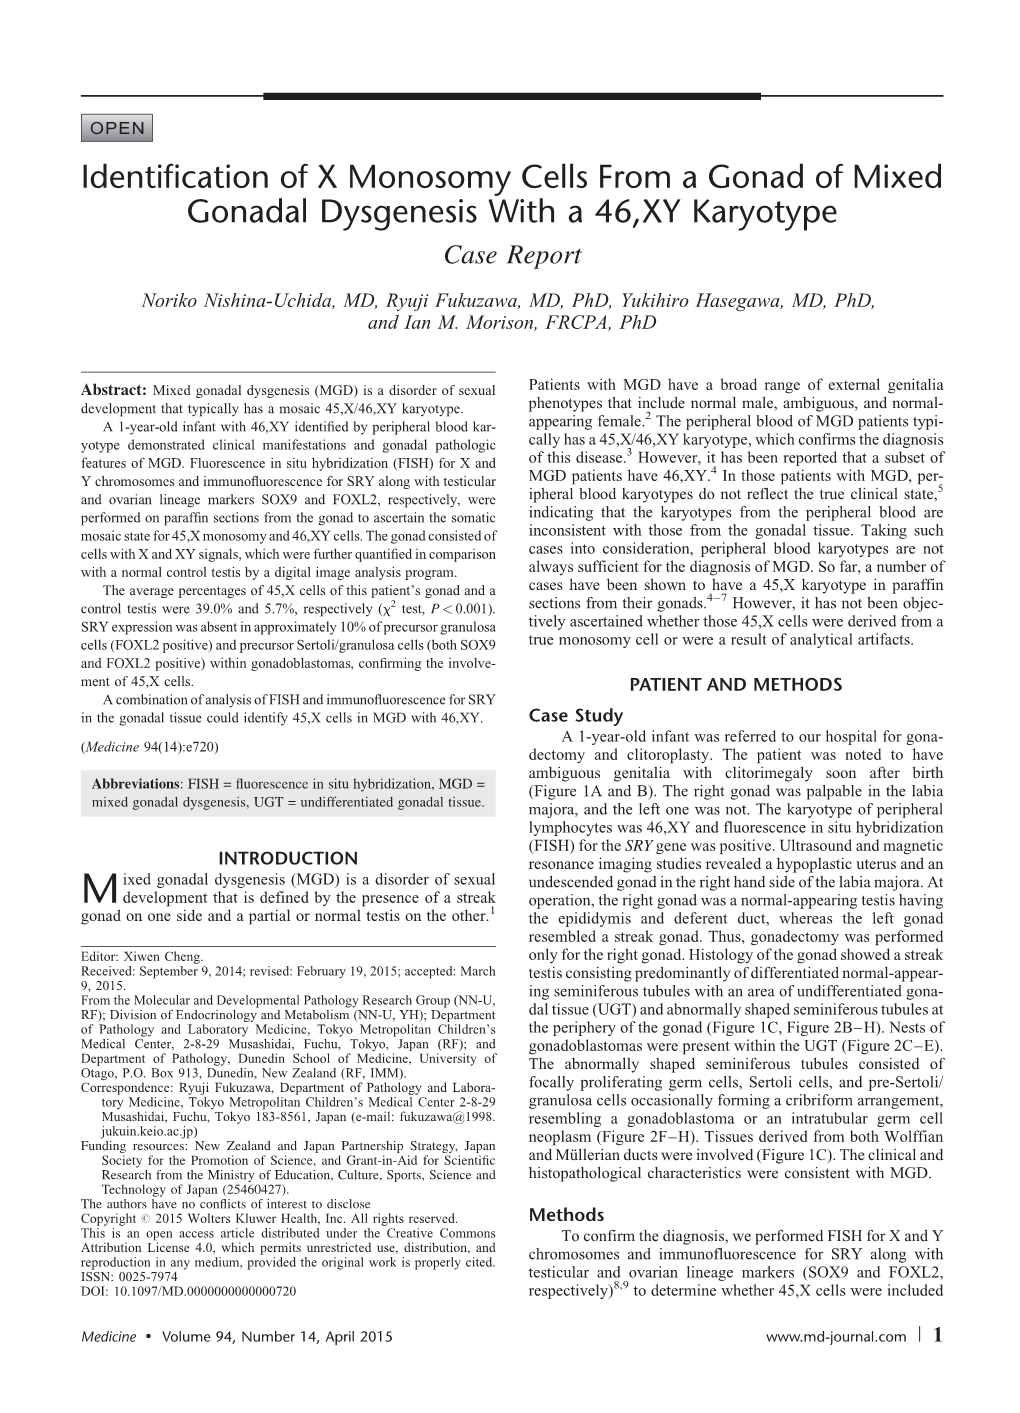 Identification of X Monosomy Cells from a Gonad of Mixed Gonadal Dysgenesis with a 46,XY Karyotype Case Report